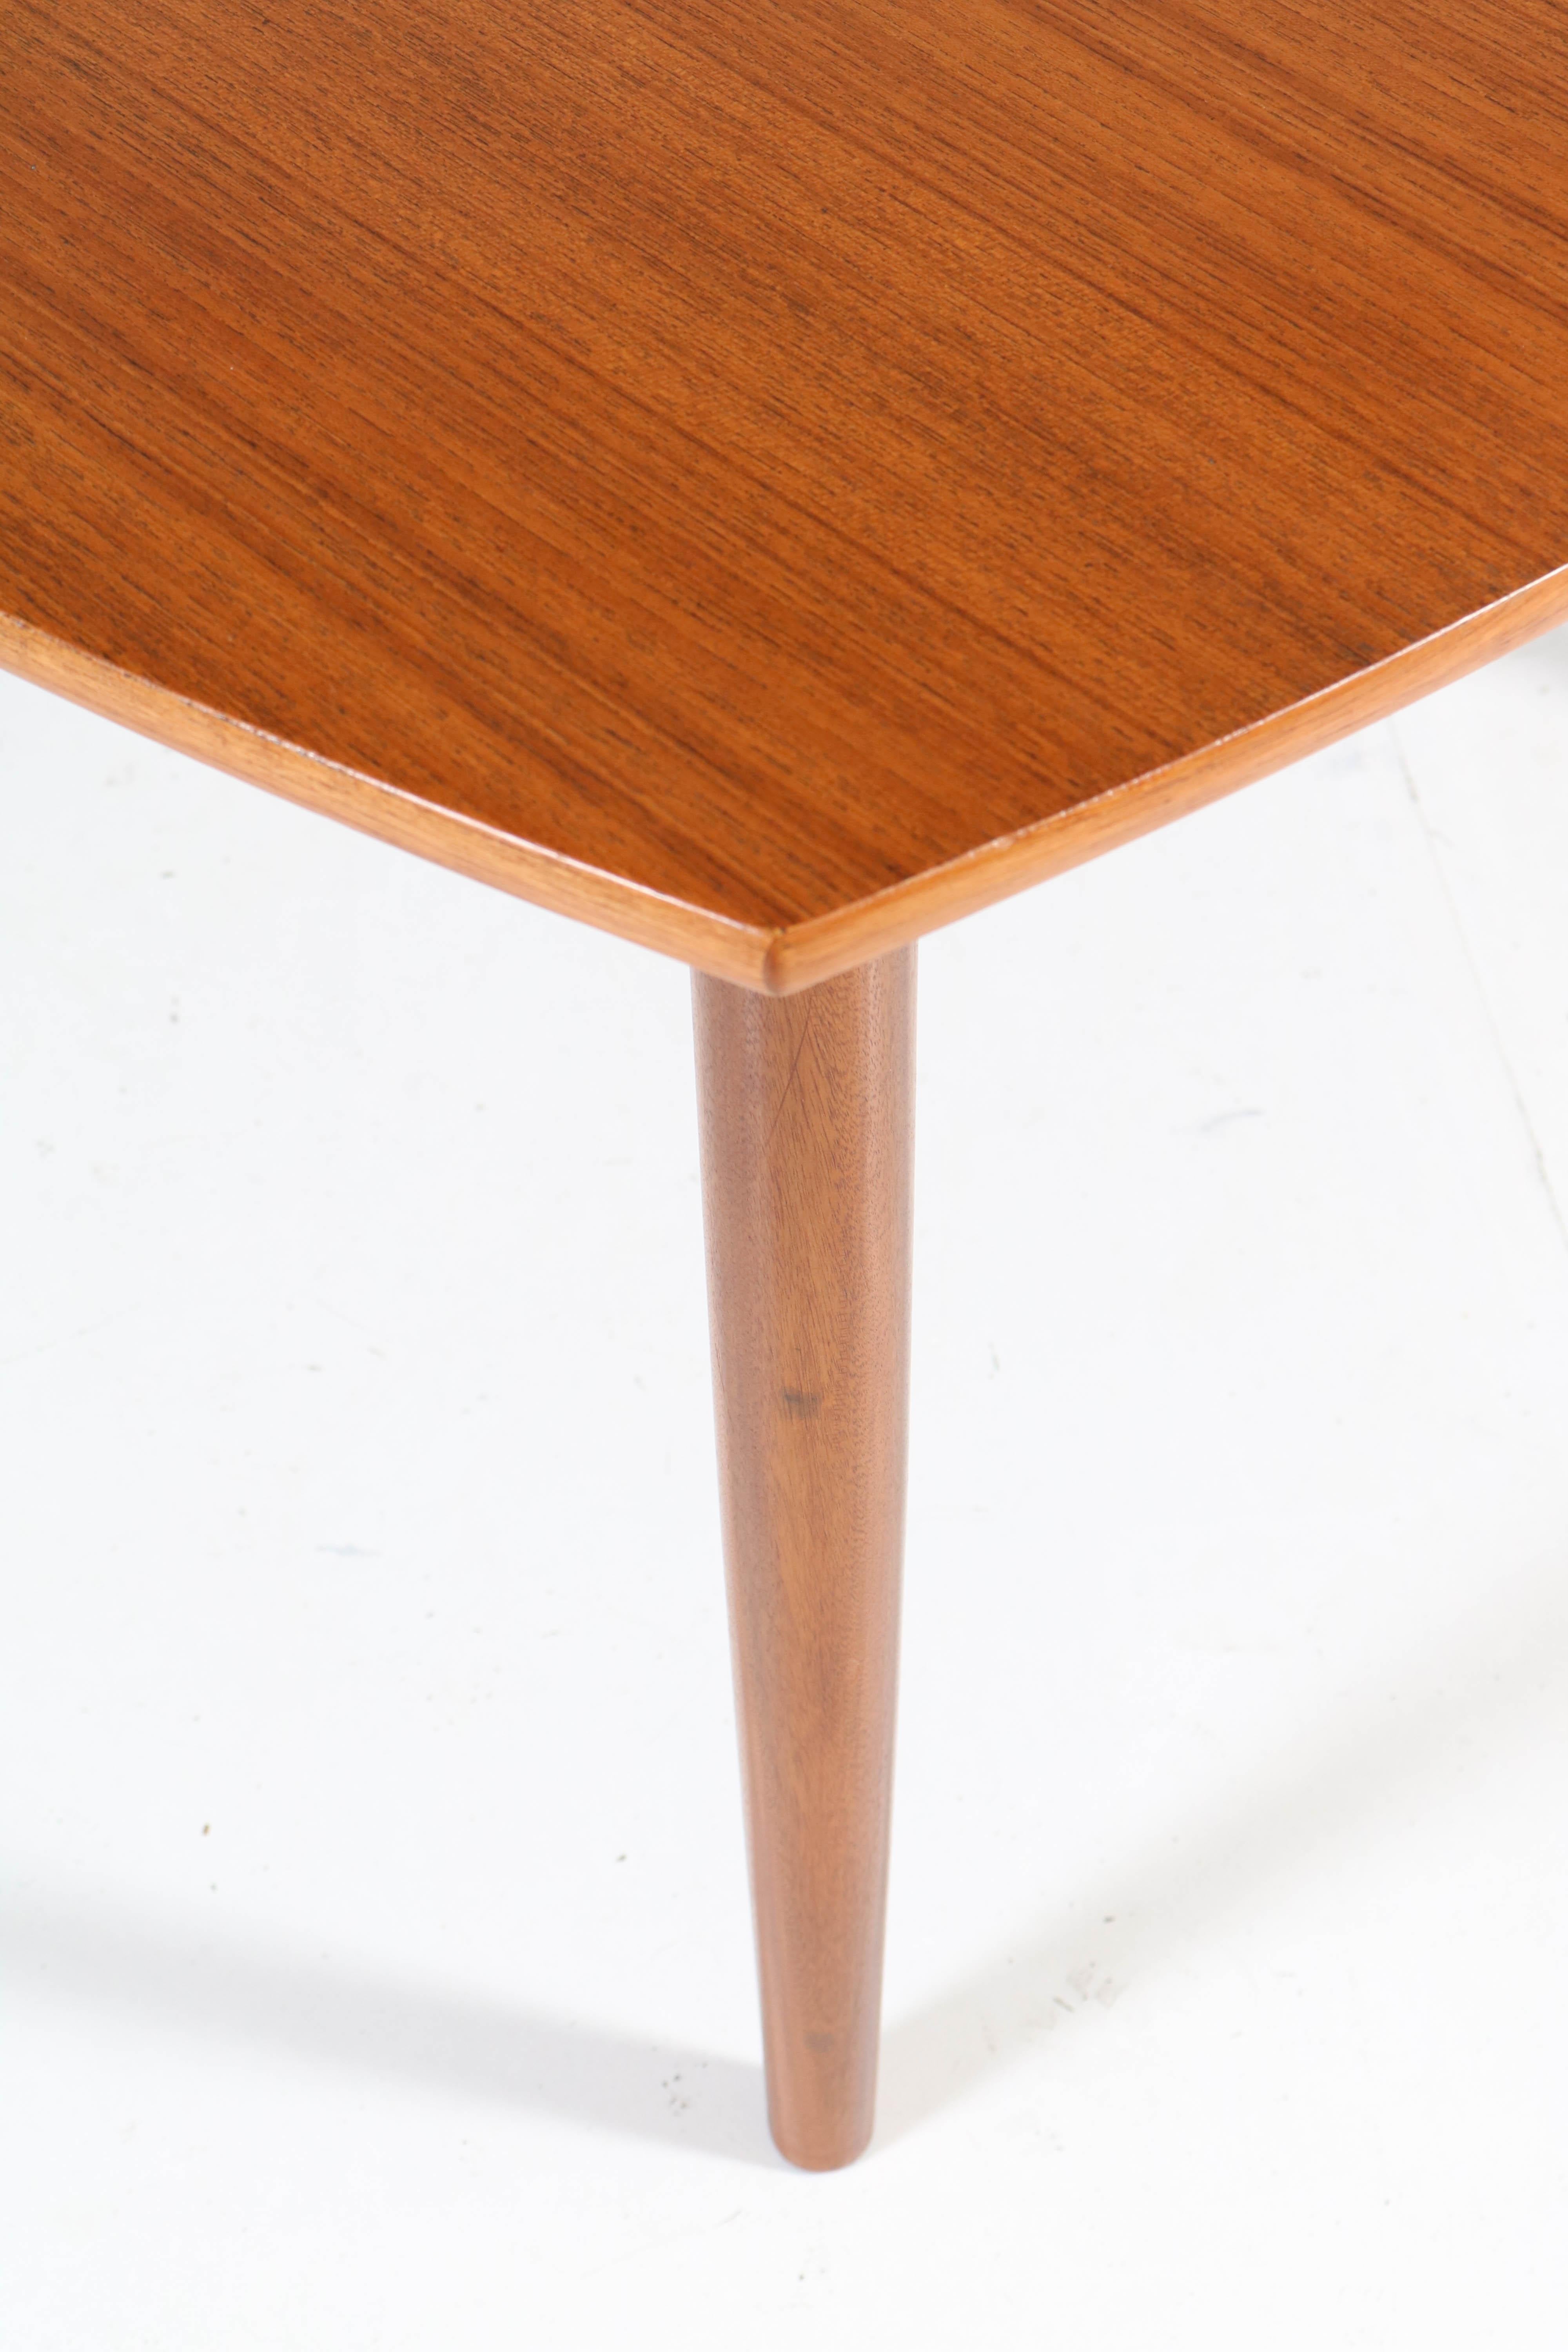 Mid-20th Century Mid-Century Modern Teak Extendable Dining Room Table by Cees Braakman for Pastoe